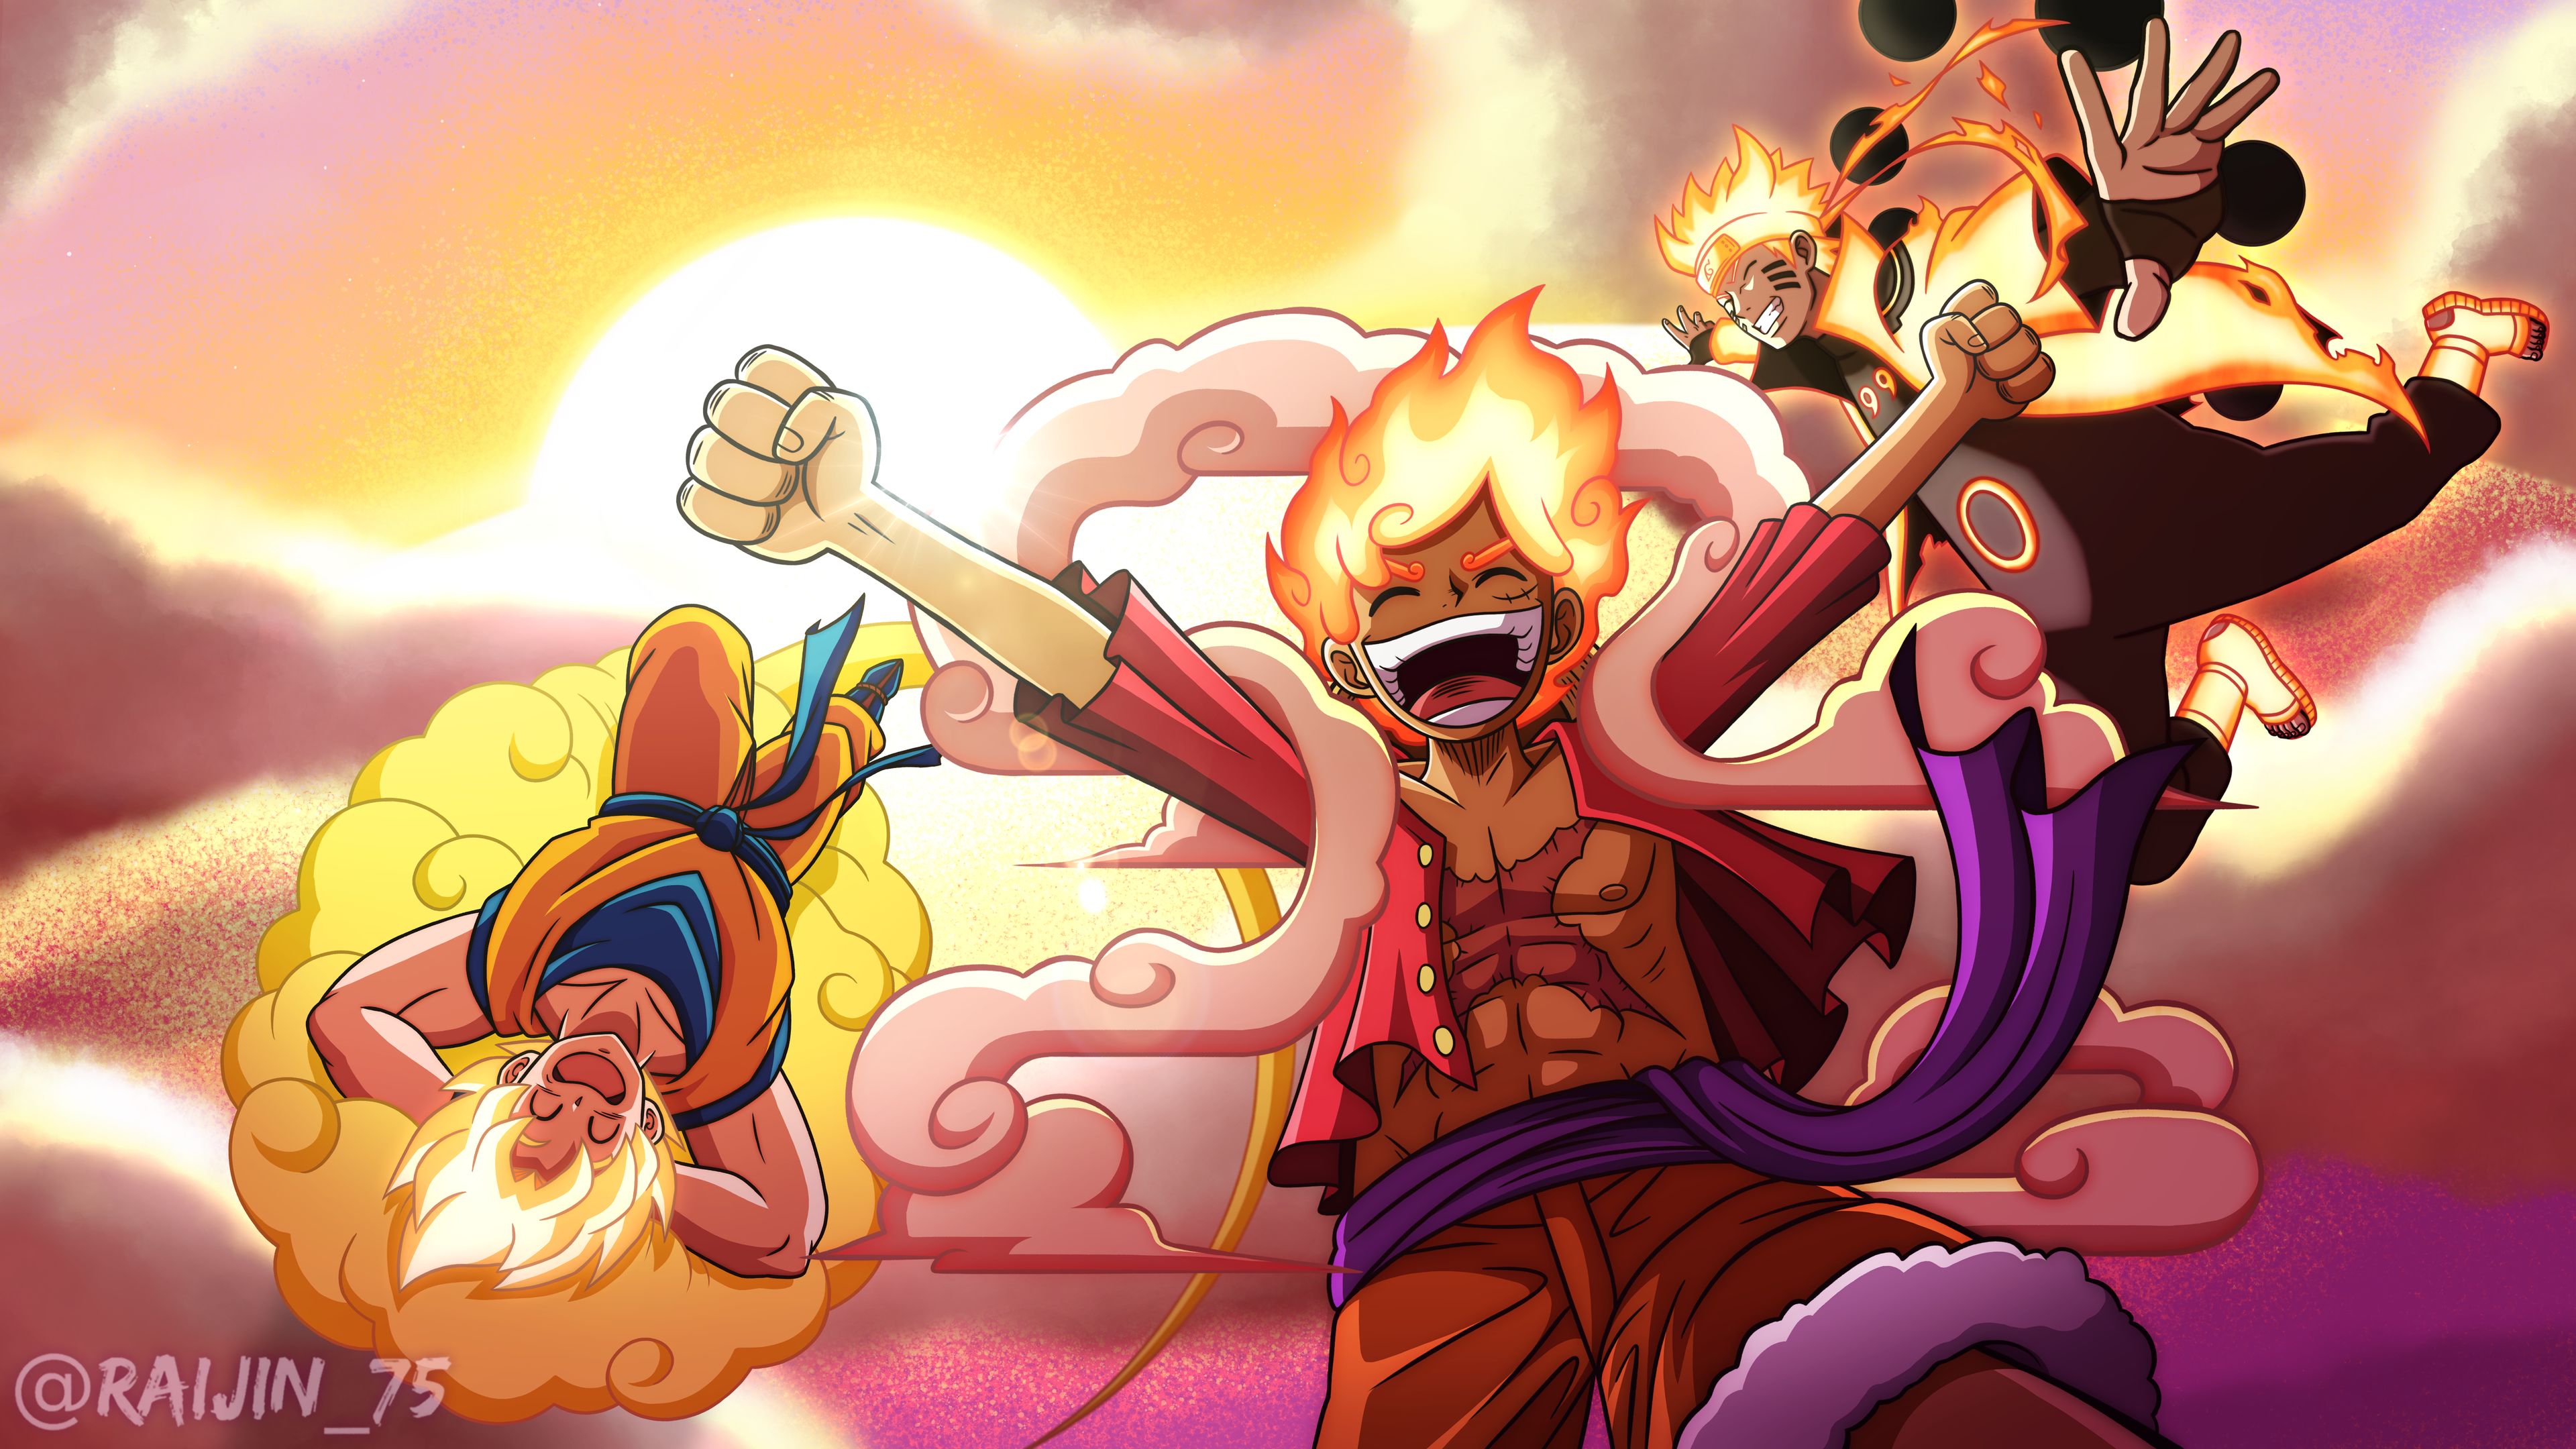 Best Luffy Gear 5 Wallpapers for Phone